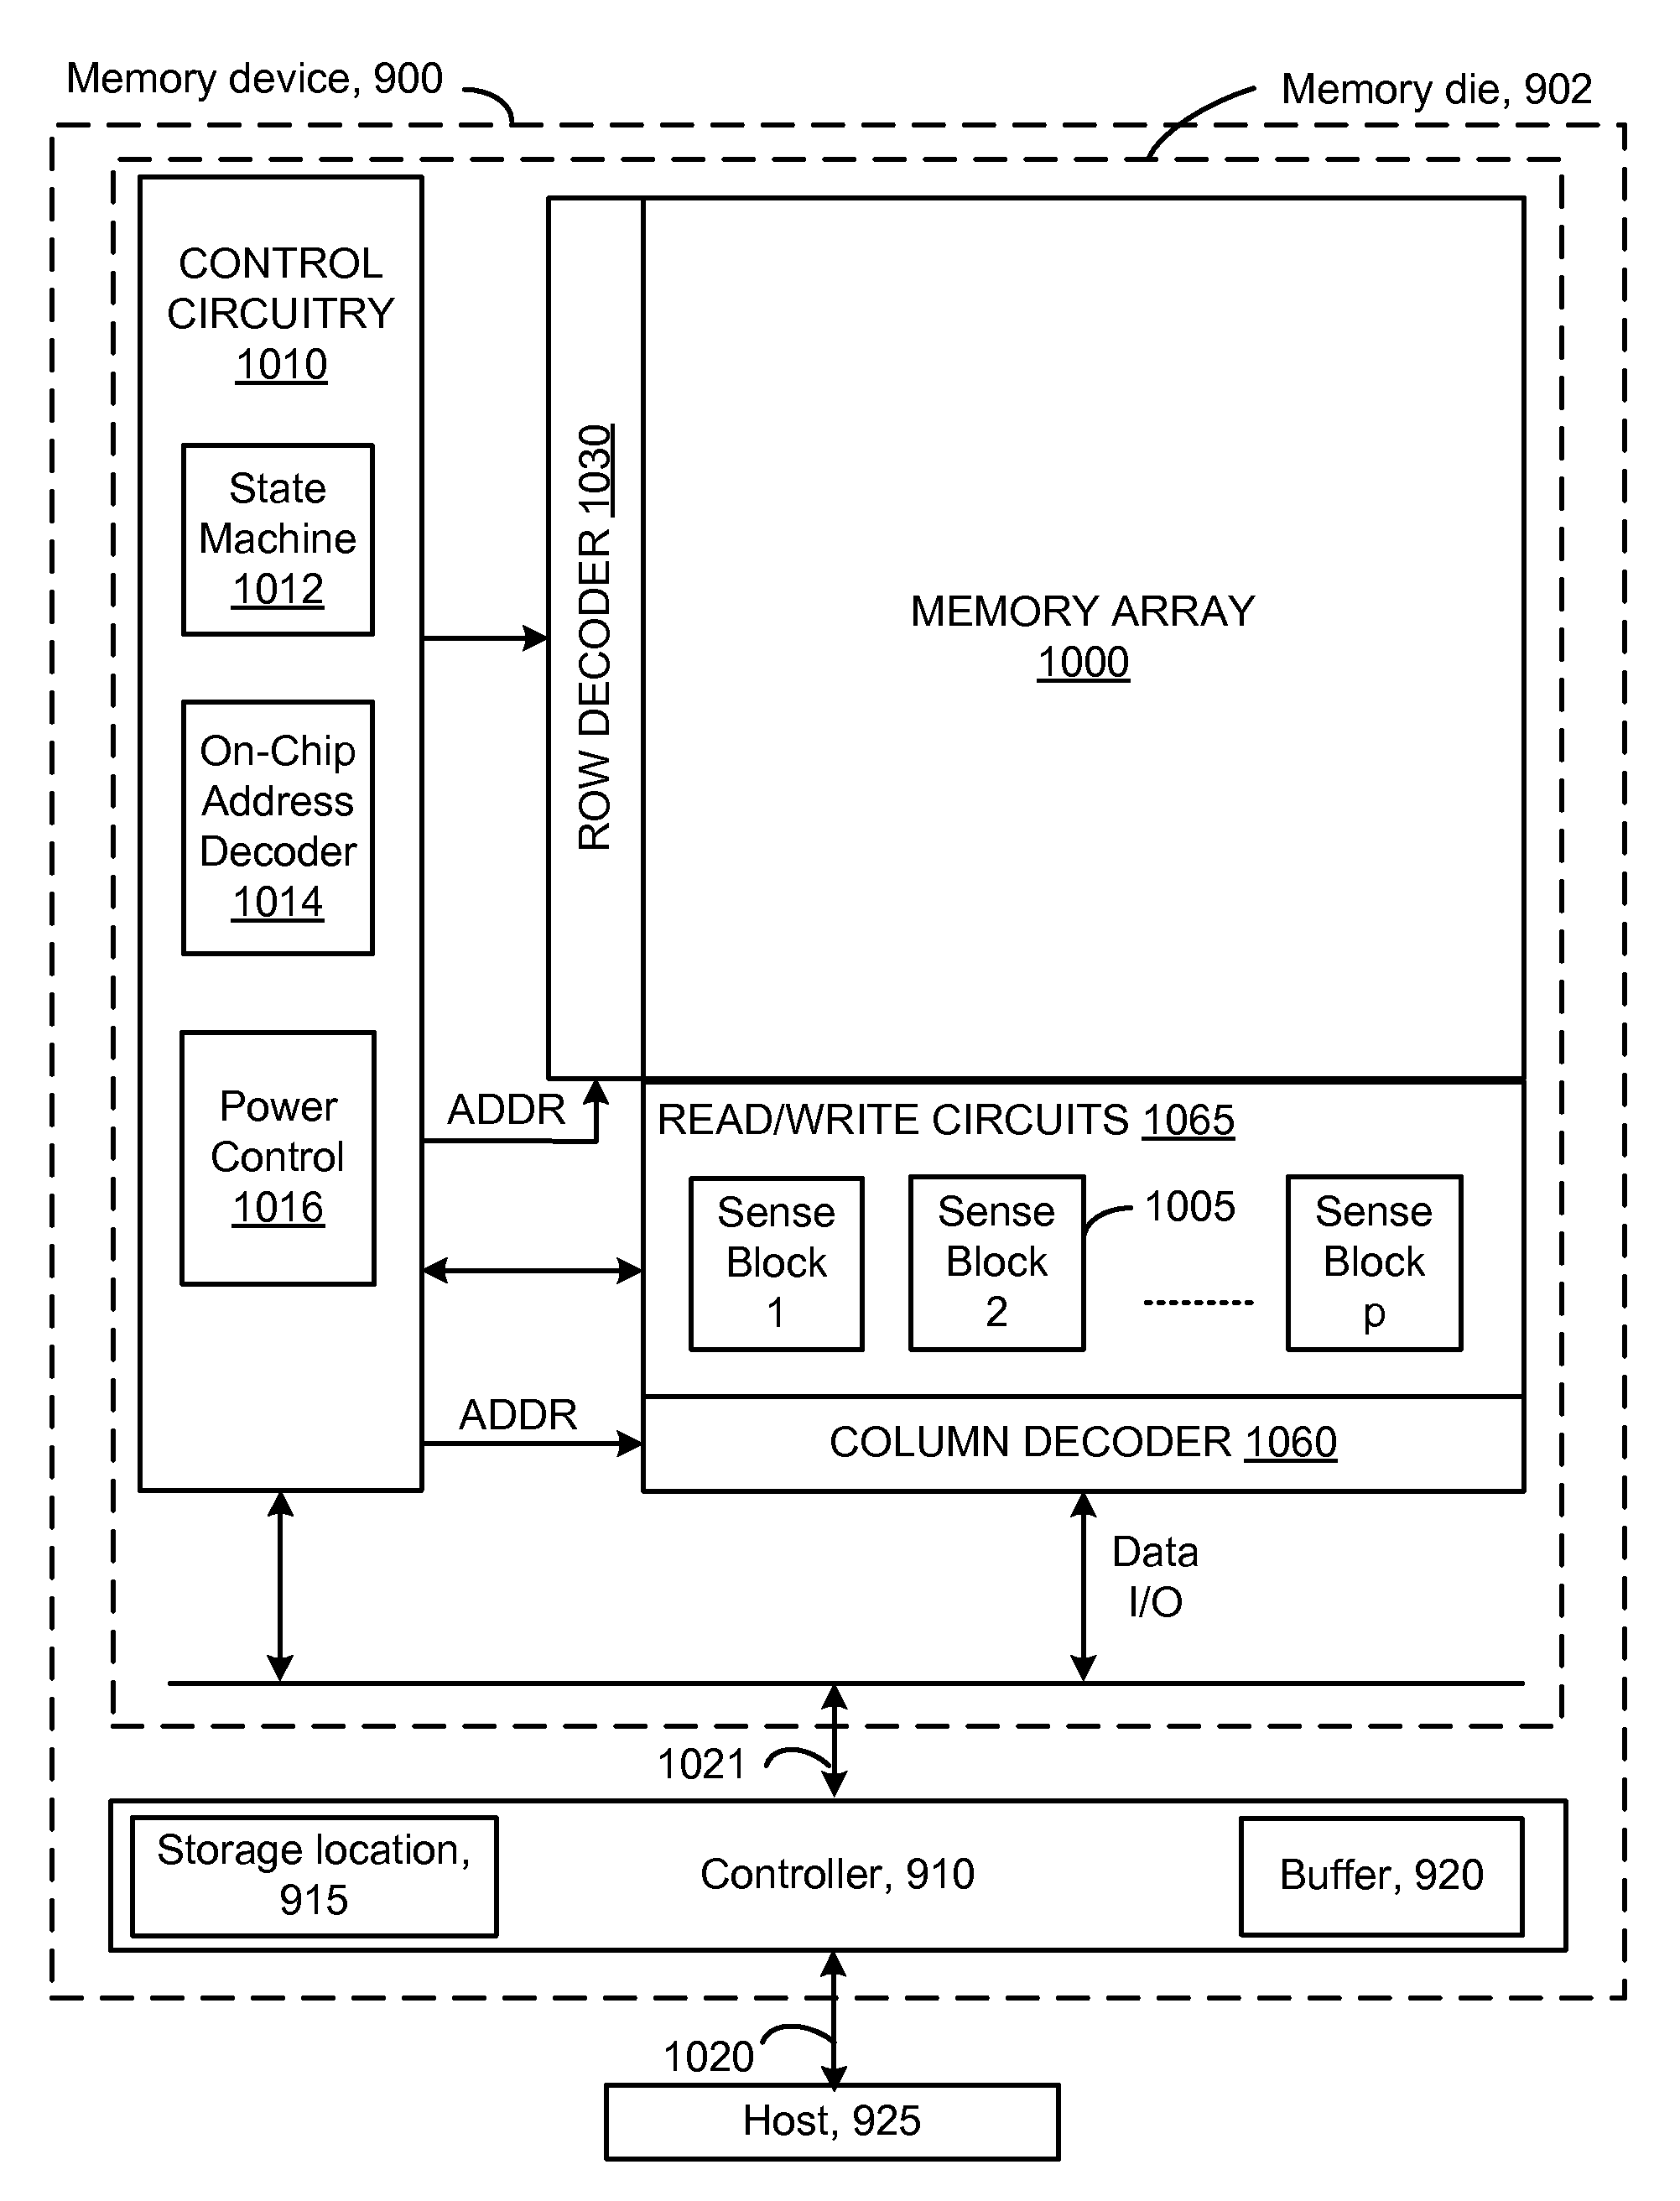 Adjustable read latency for memory device in page-mode access